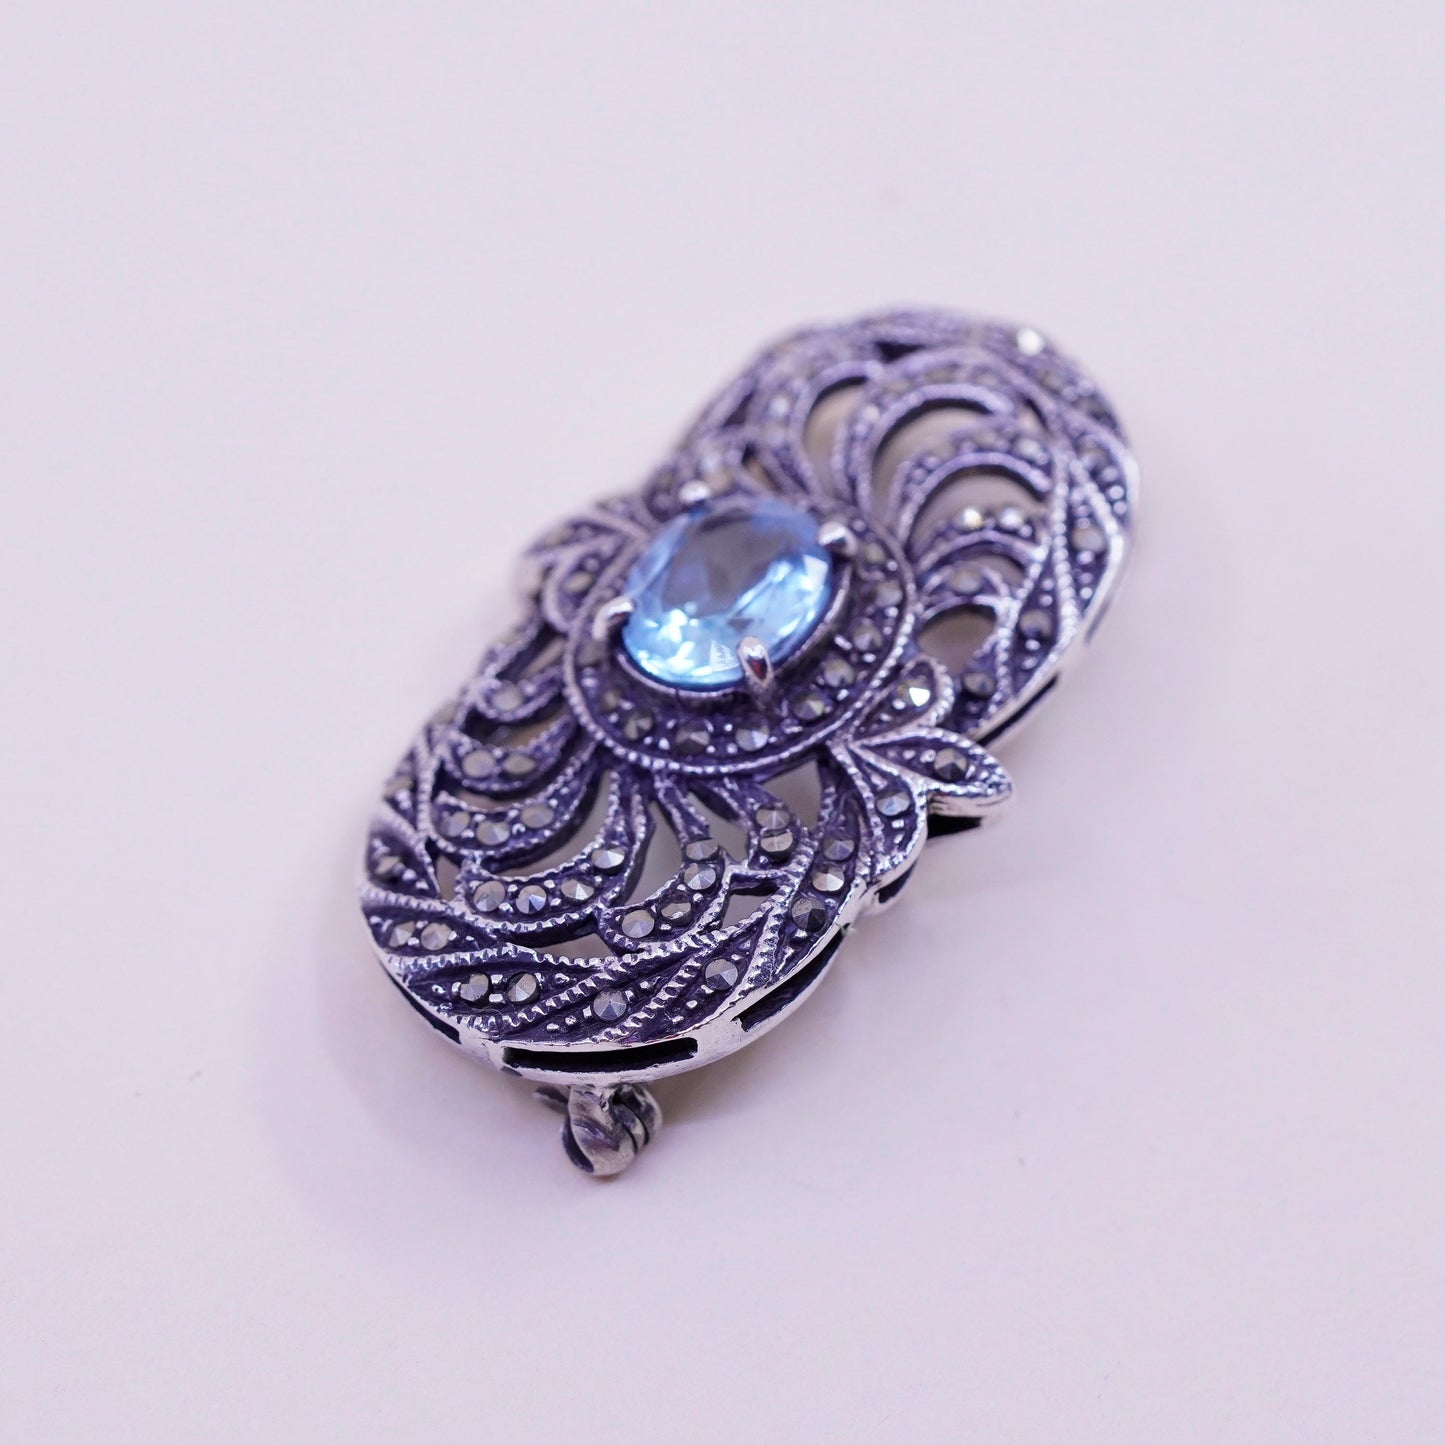 Vintage Sterling 925 silver handmade filigree brooch with topaz and marcasite